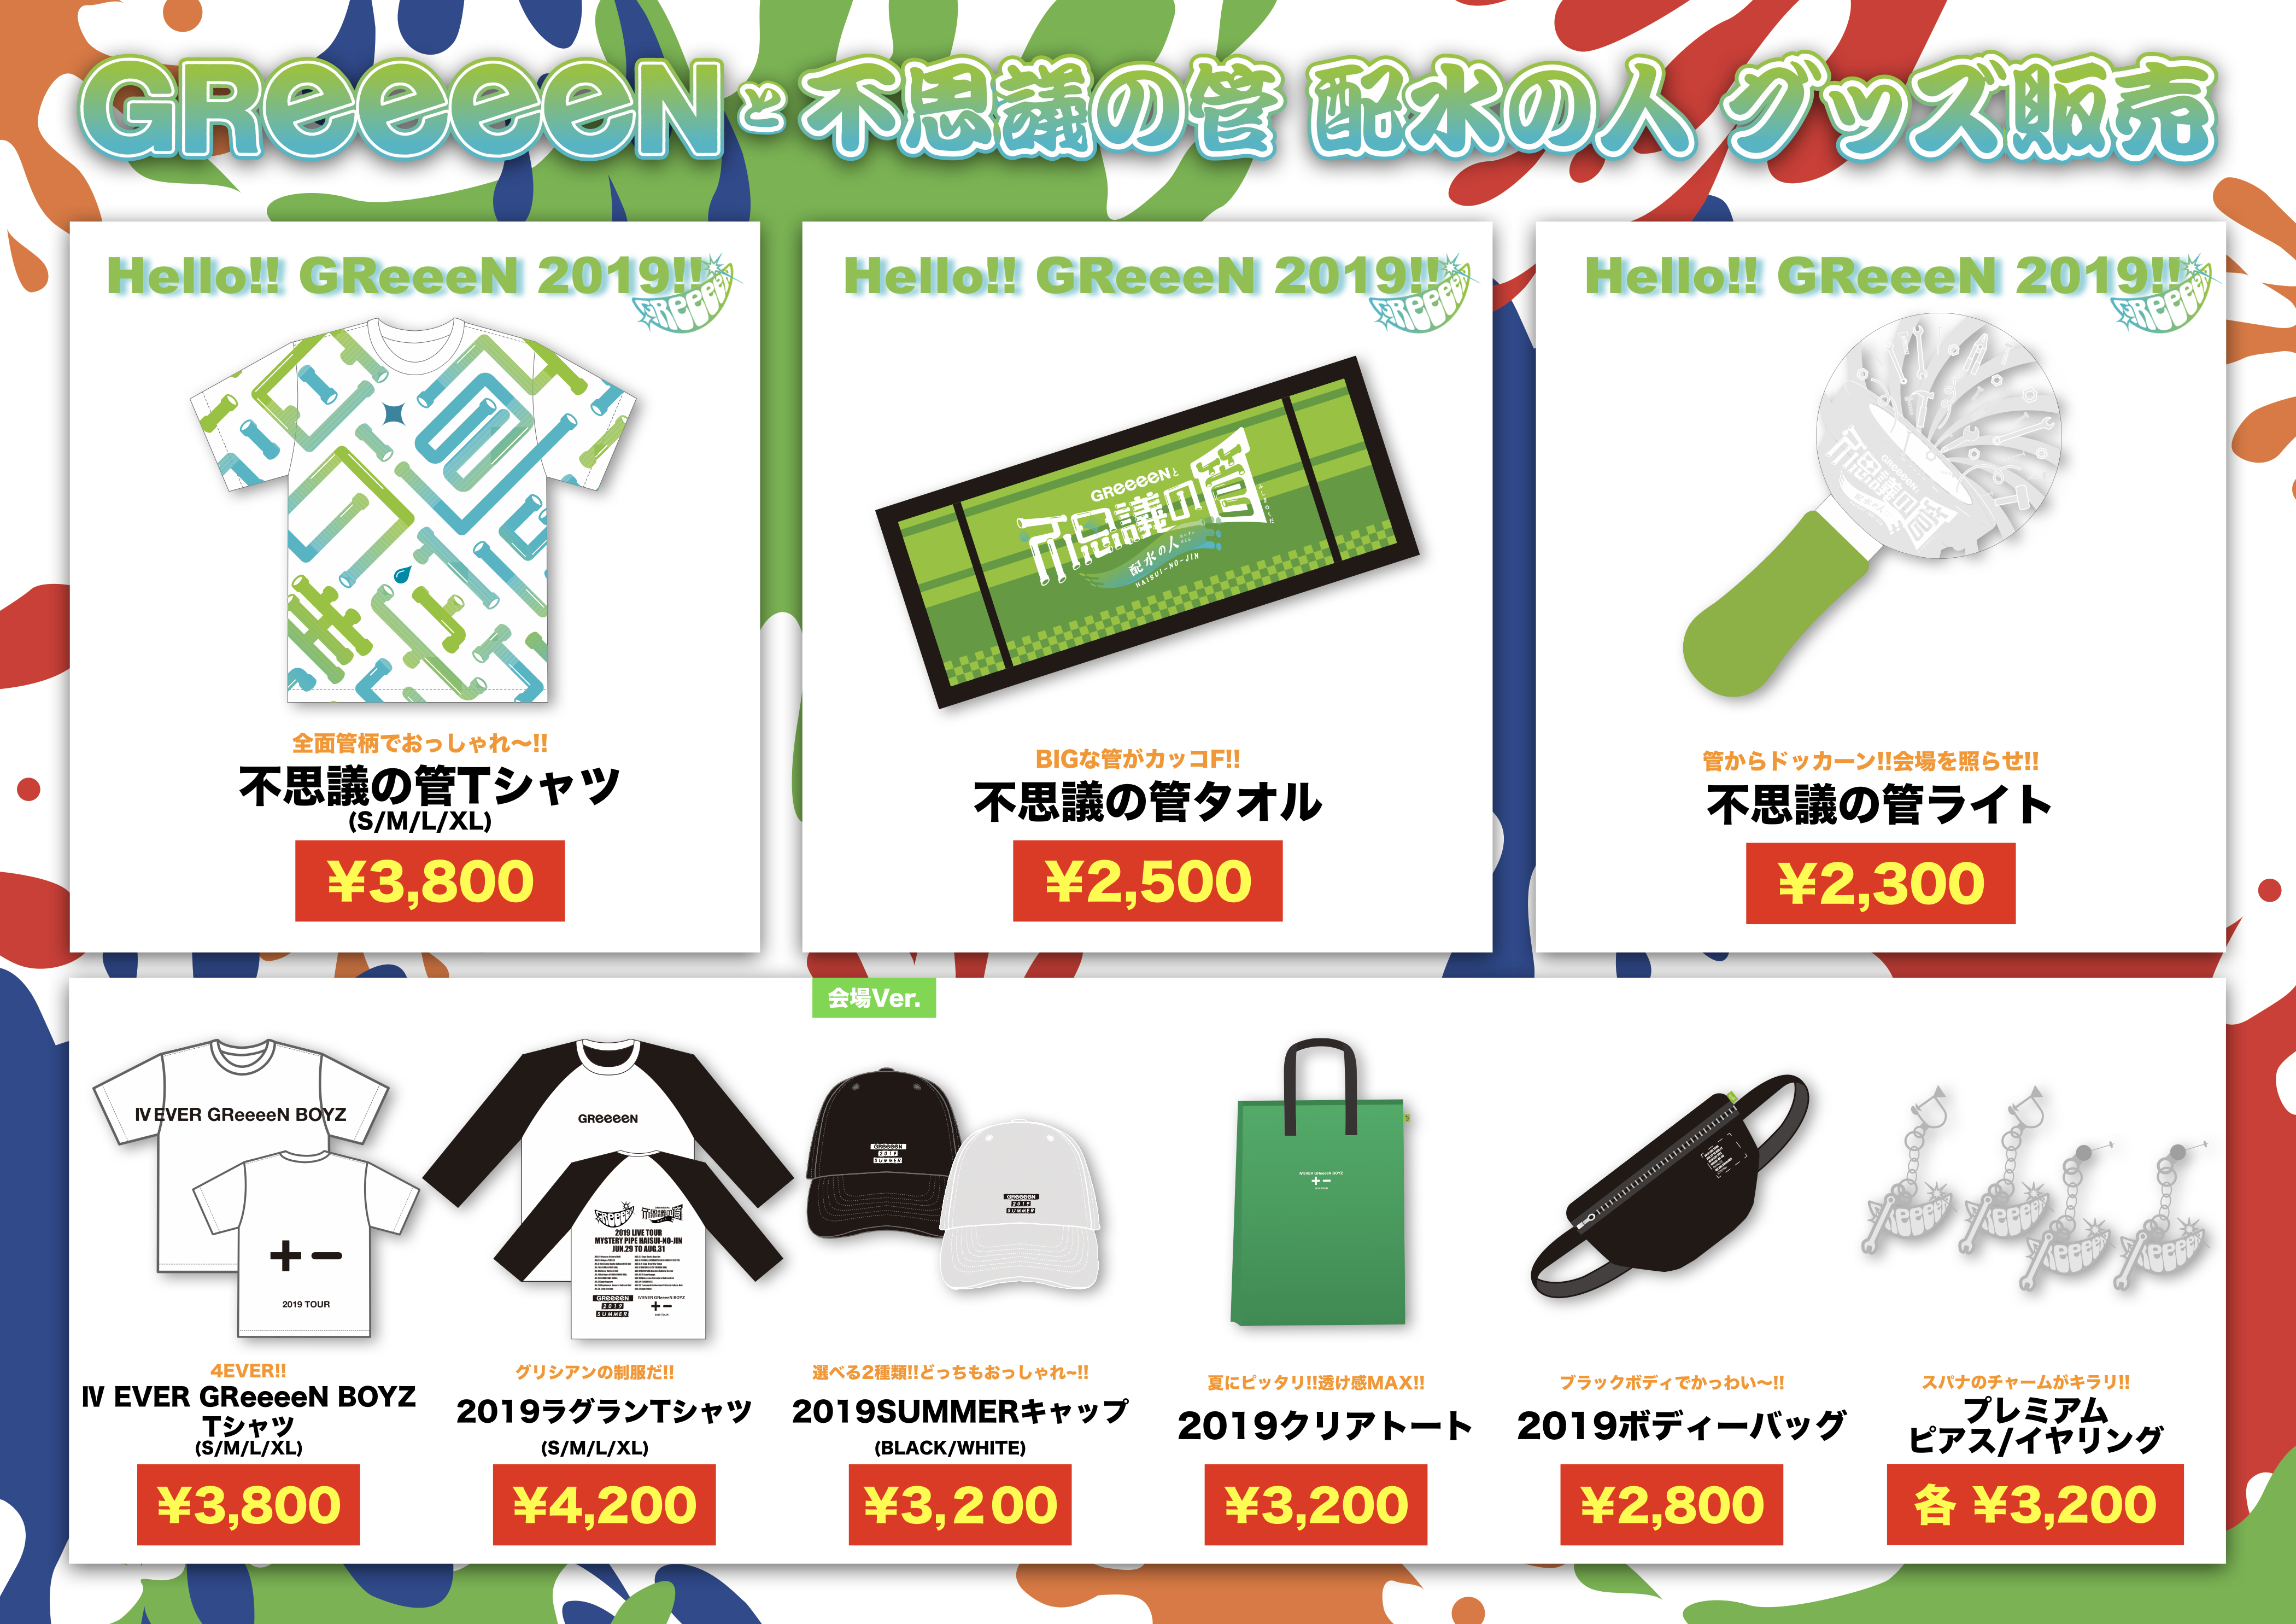 GReeeeN☆グッズ - その他